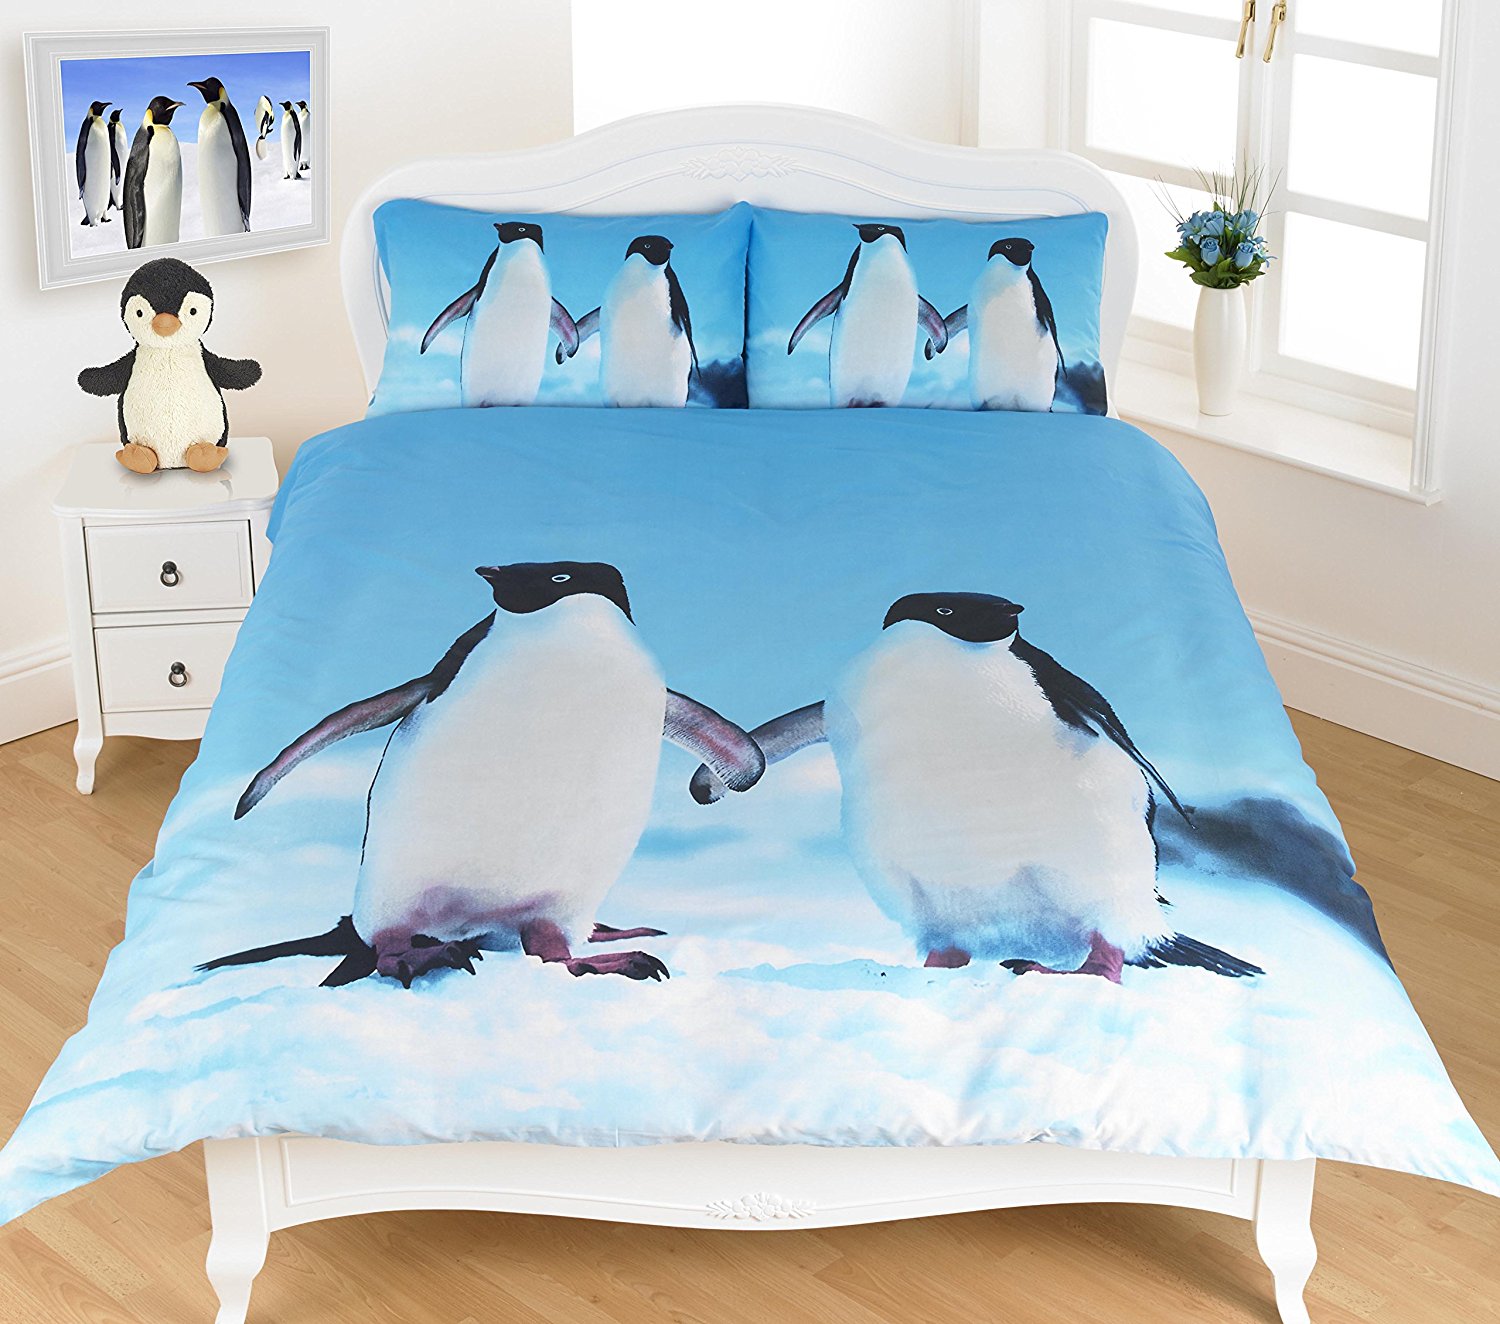 Penguin 3D Duvet Cover Sets With Pillowcases - Poly Cotton Fabric 3D Bedding